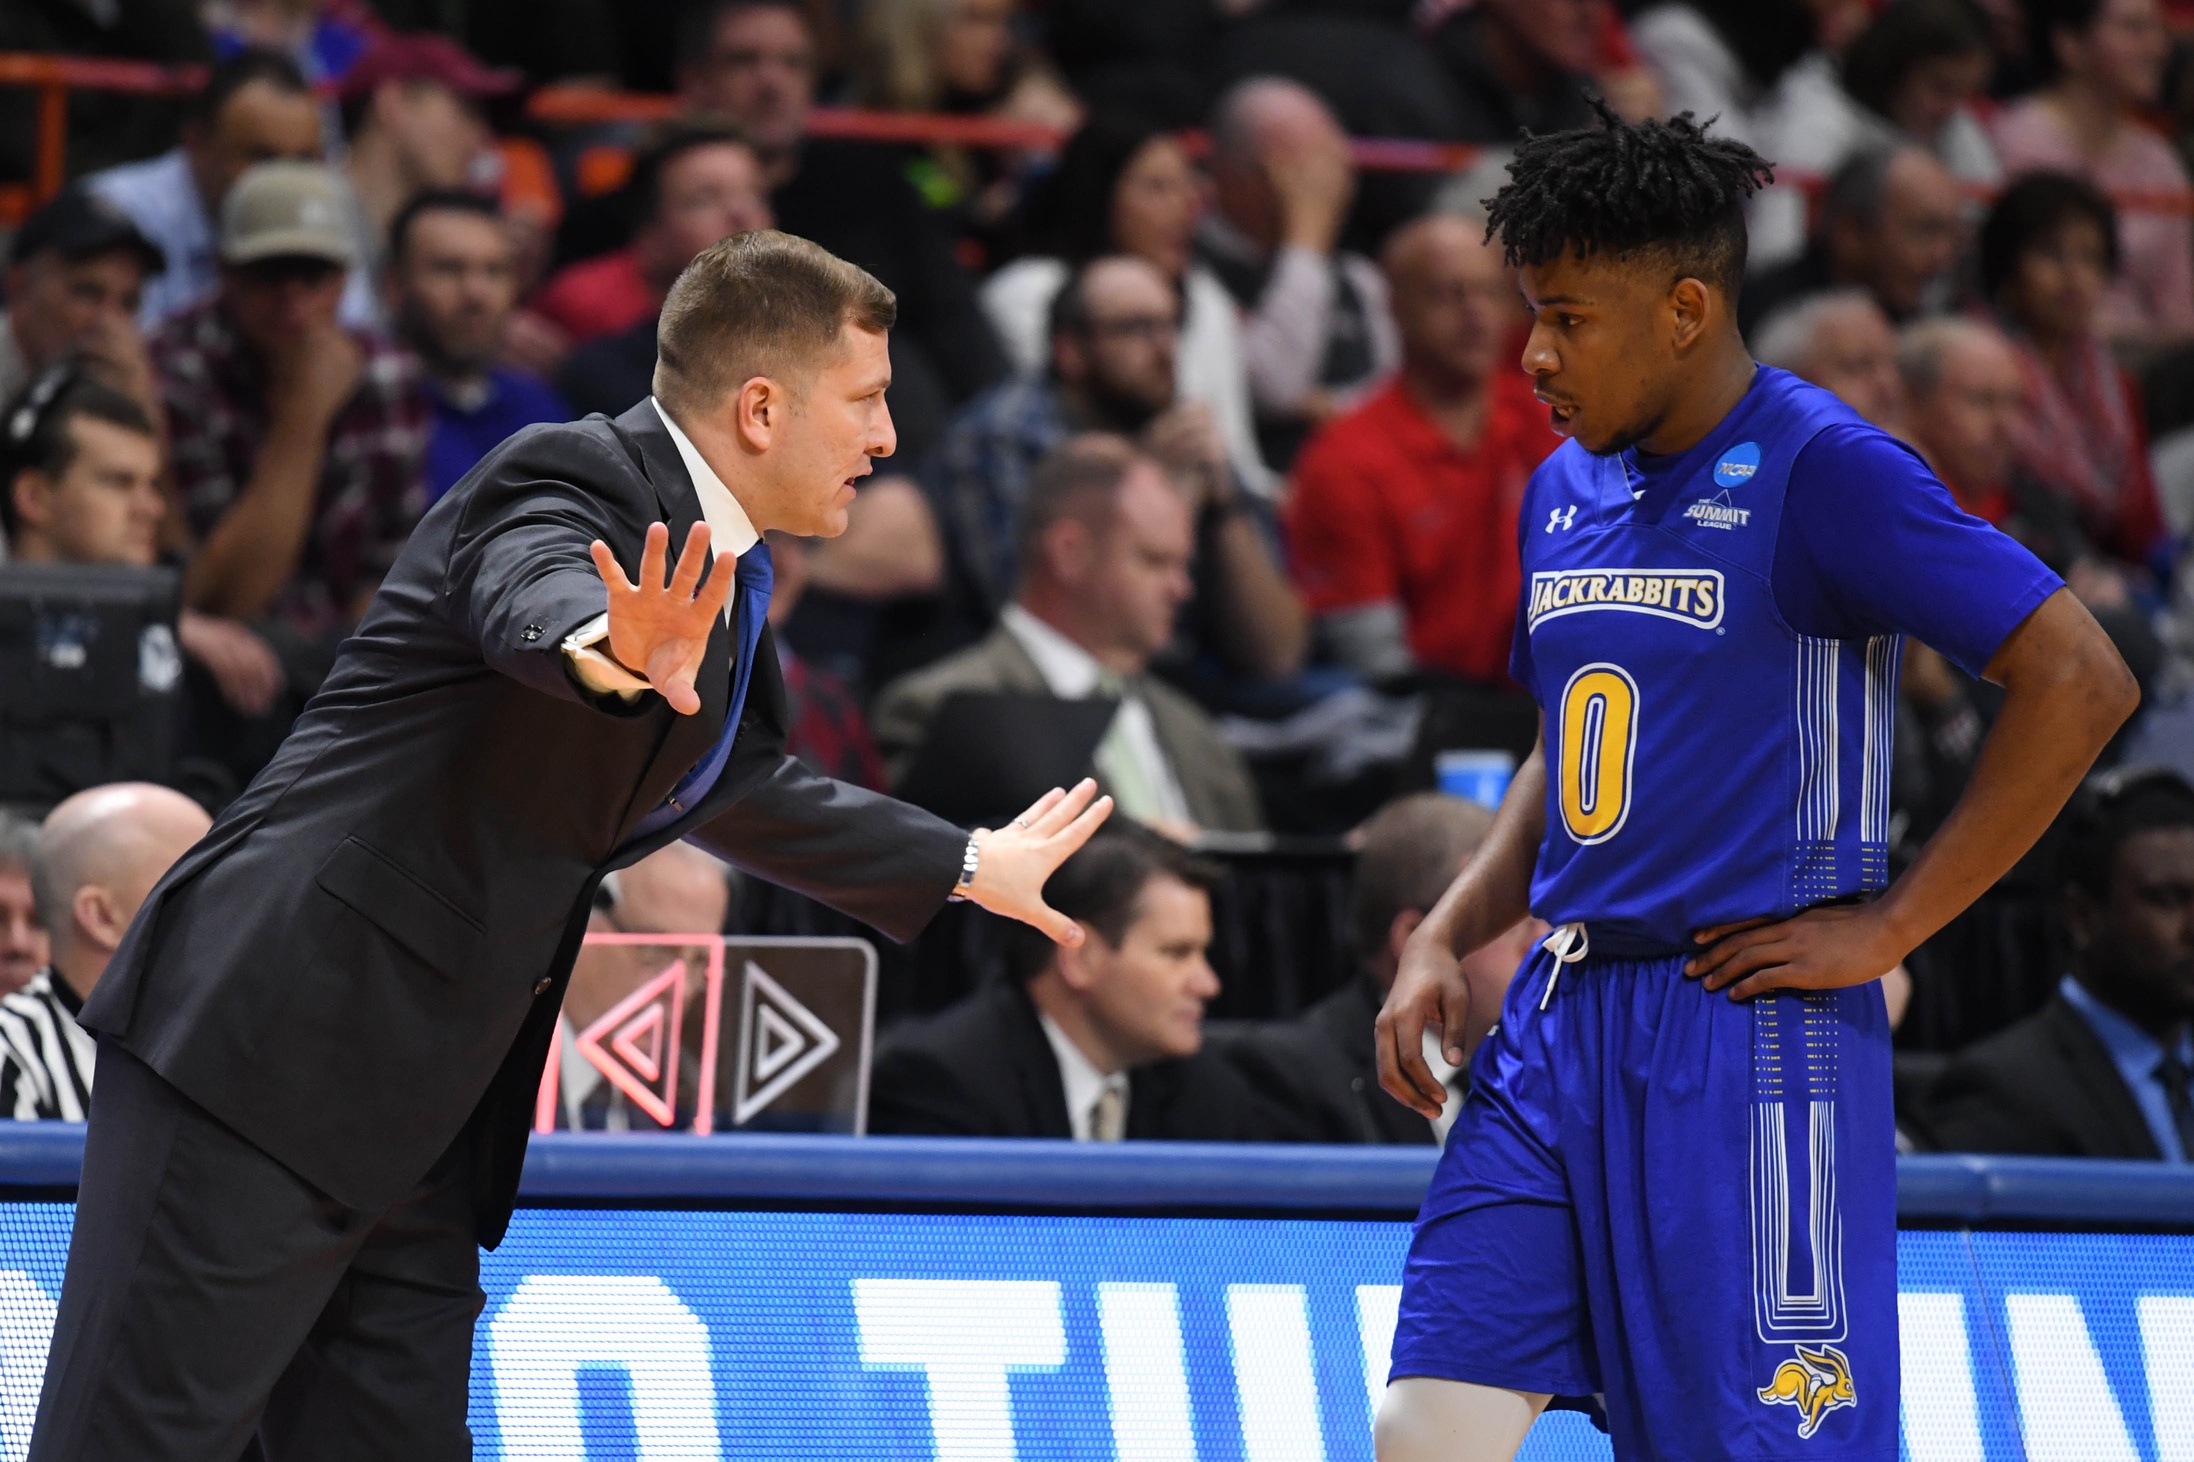 CSJ Men’s Hoops Preview, South Dakota State at Memphis: How To Watch and Fearless Prediction